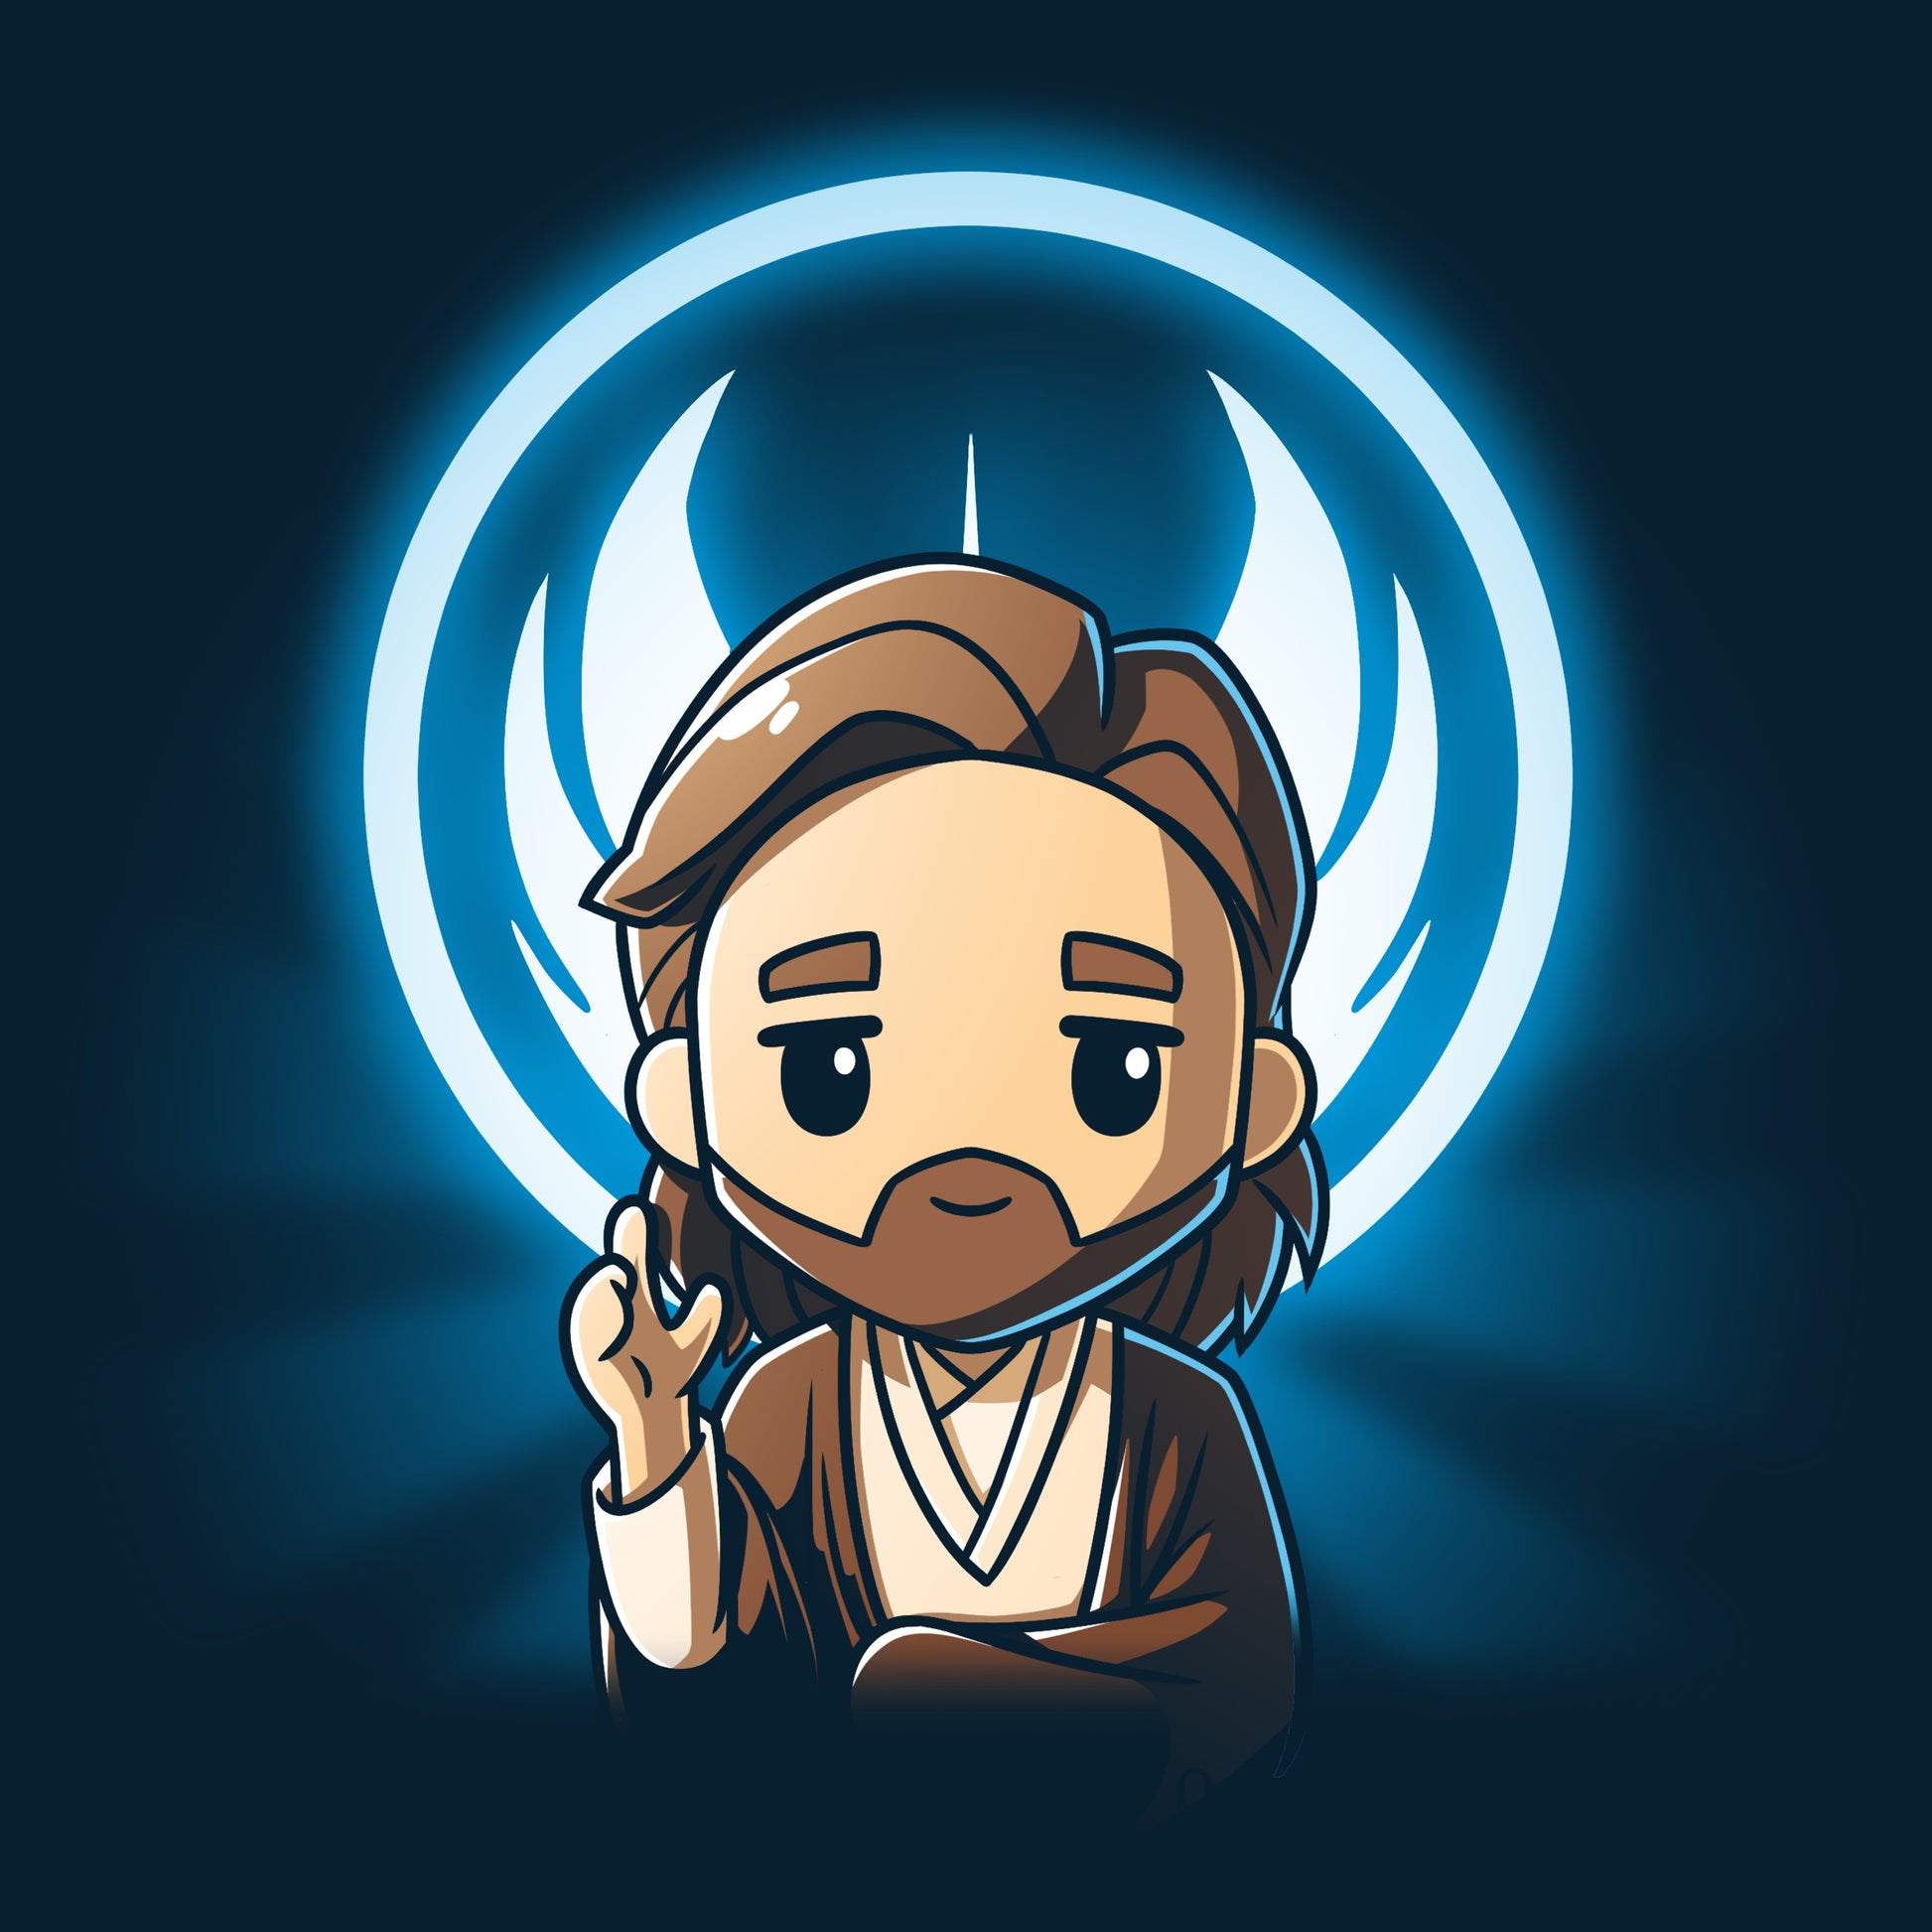 Officially licensed Star Wars Obi-Wan Kenobi T-shirt featuring the Force.